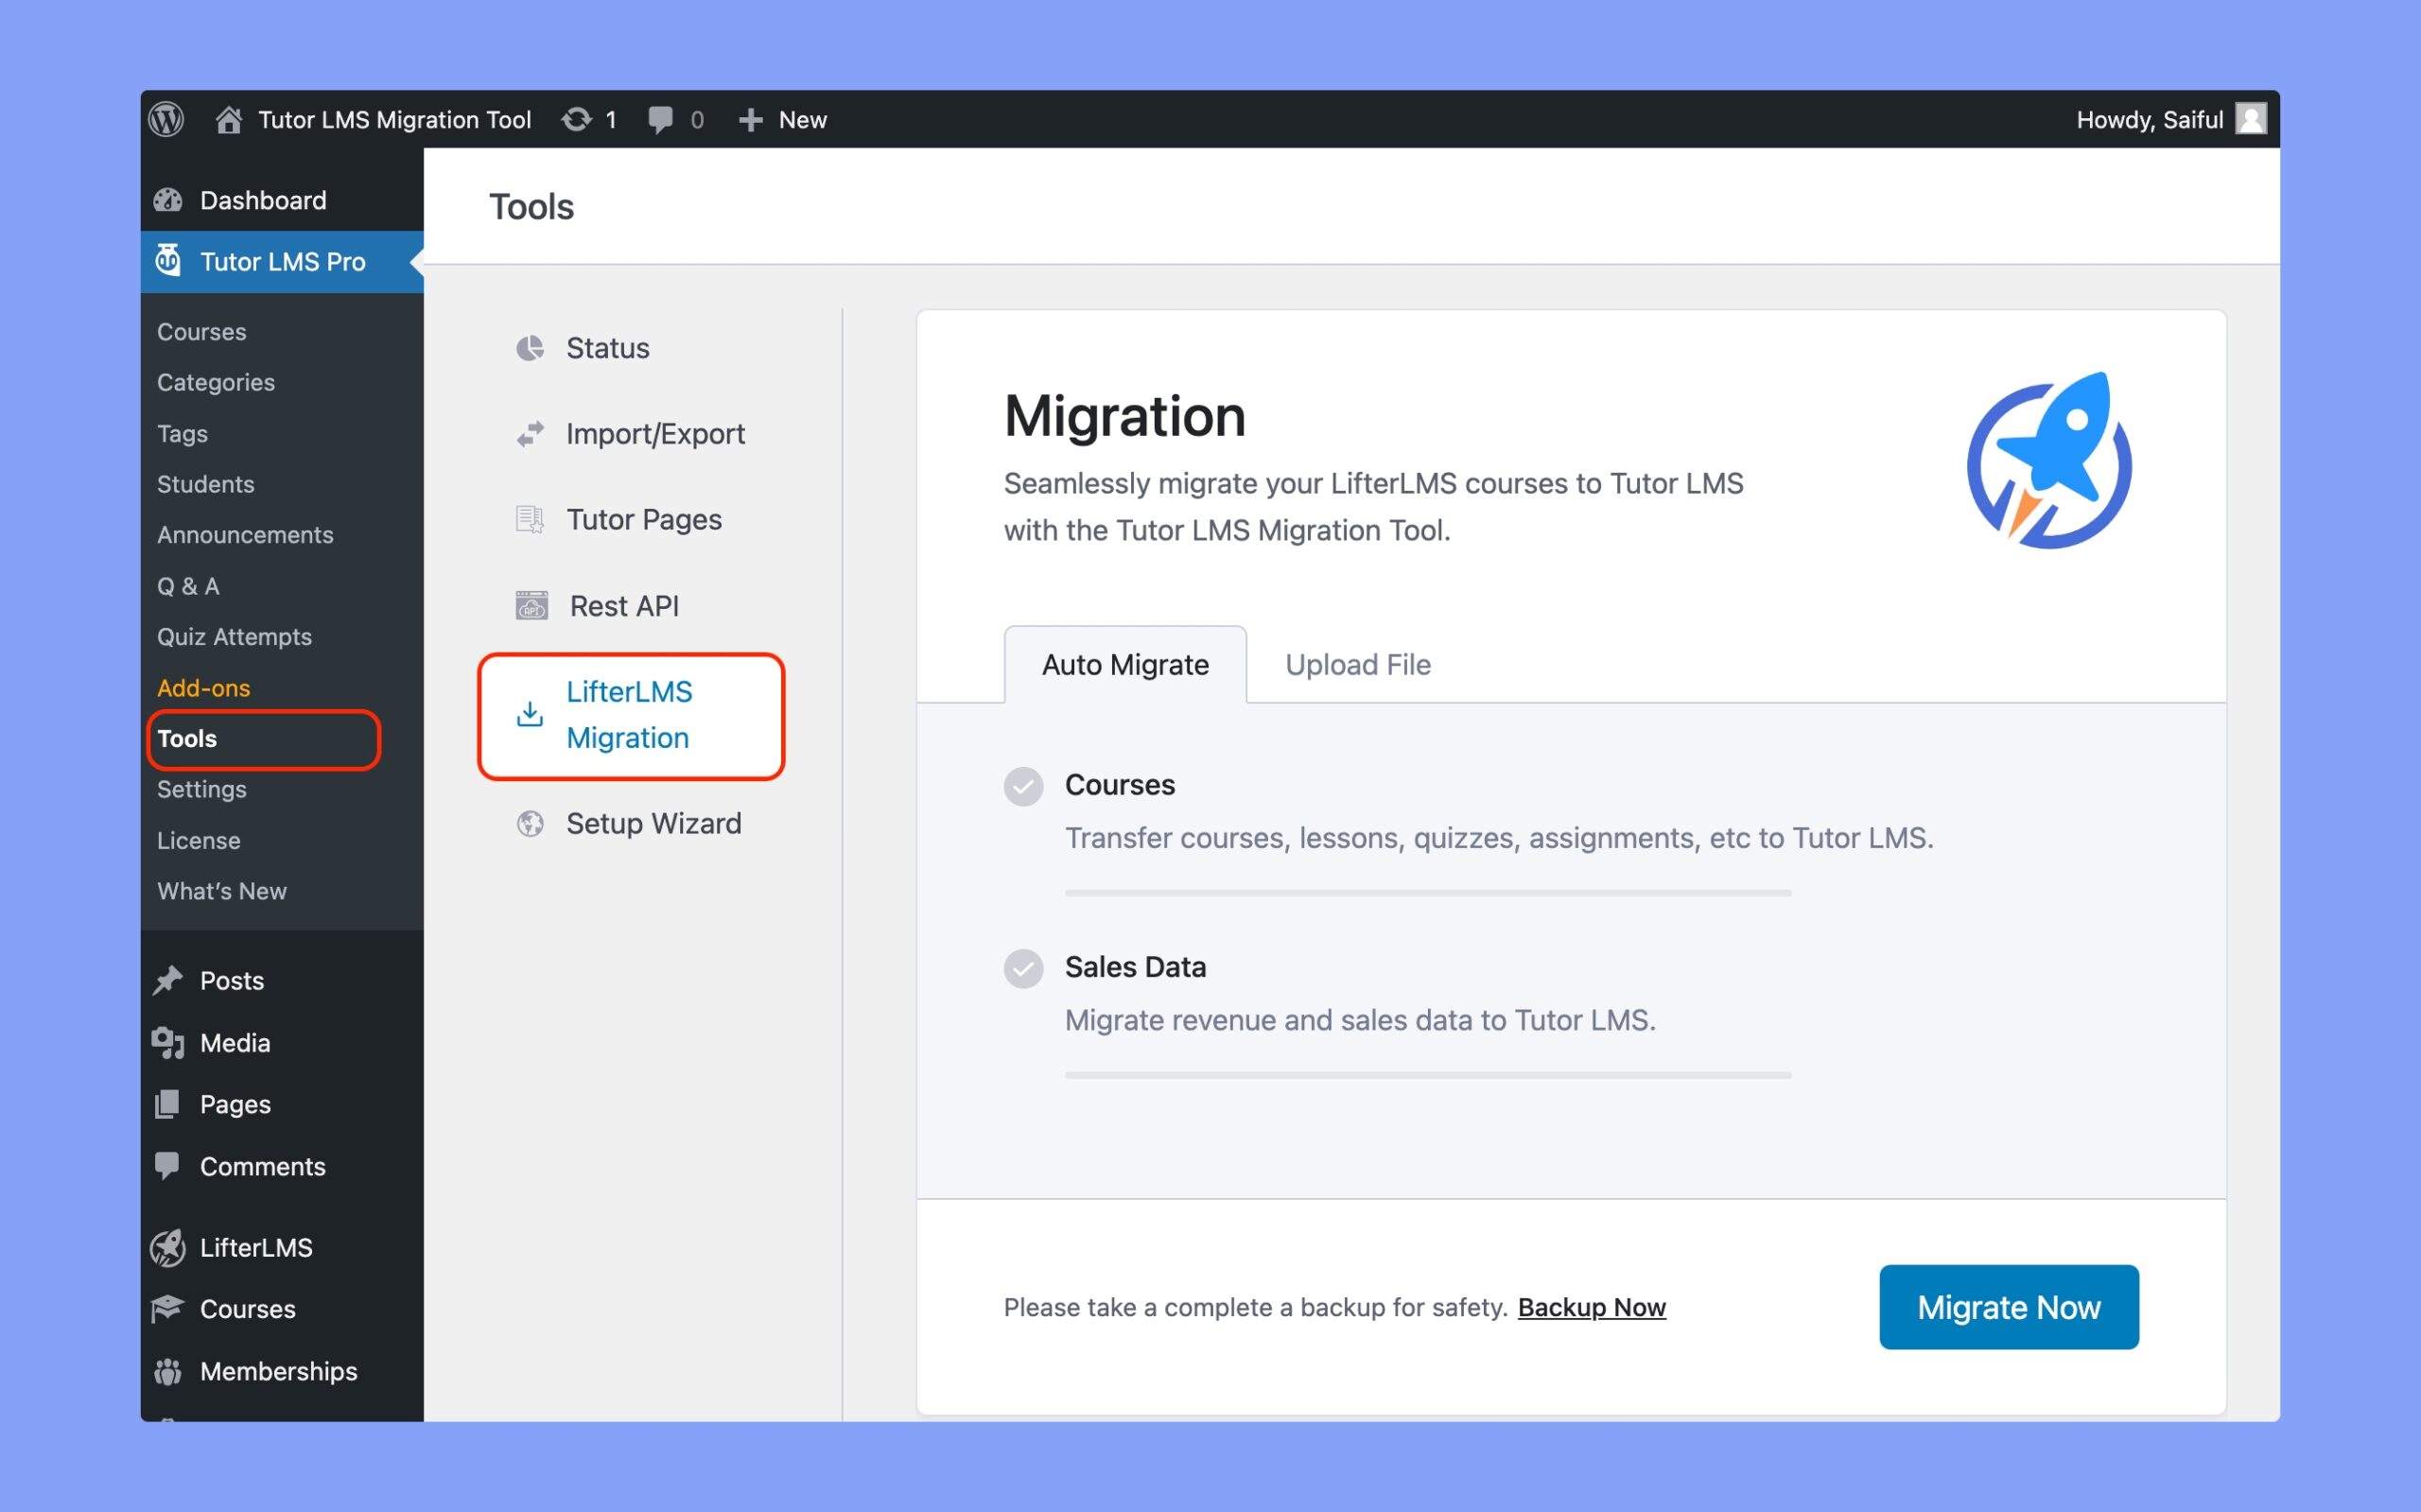 Auto Migration from LifterLMS to Tutor LMS